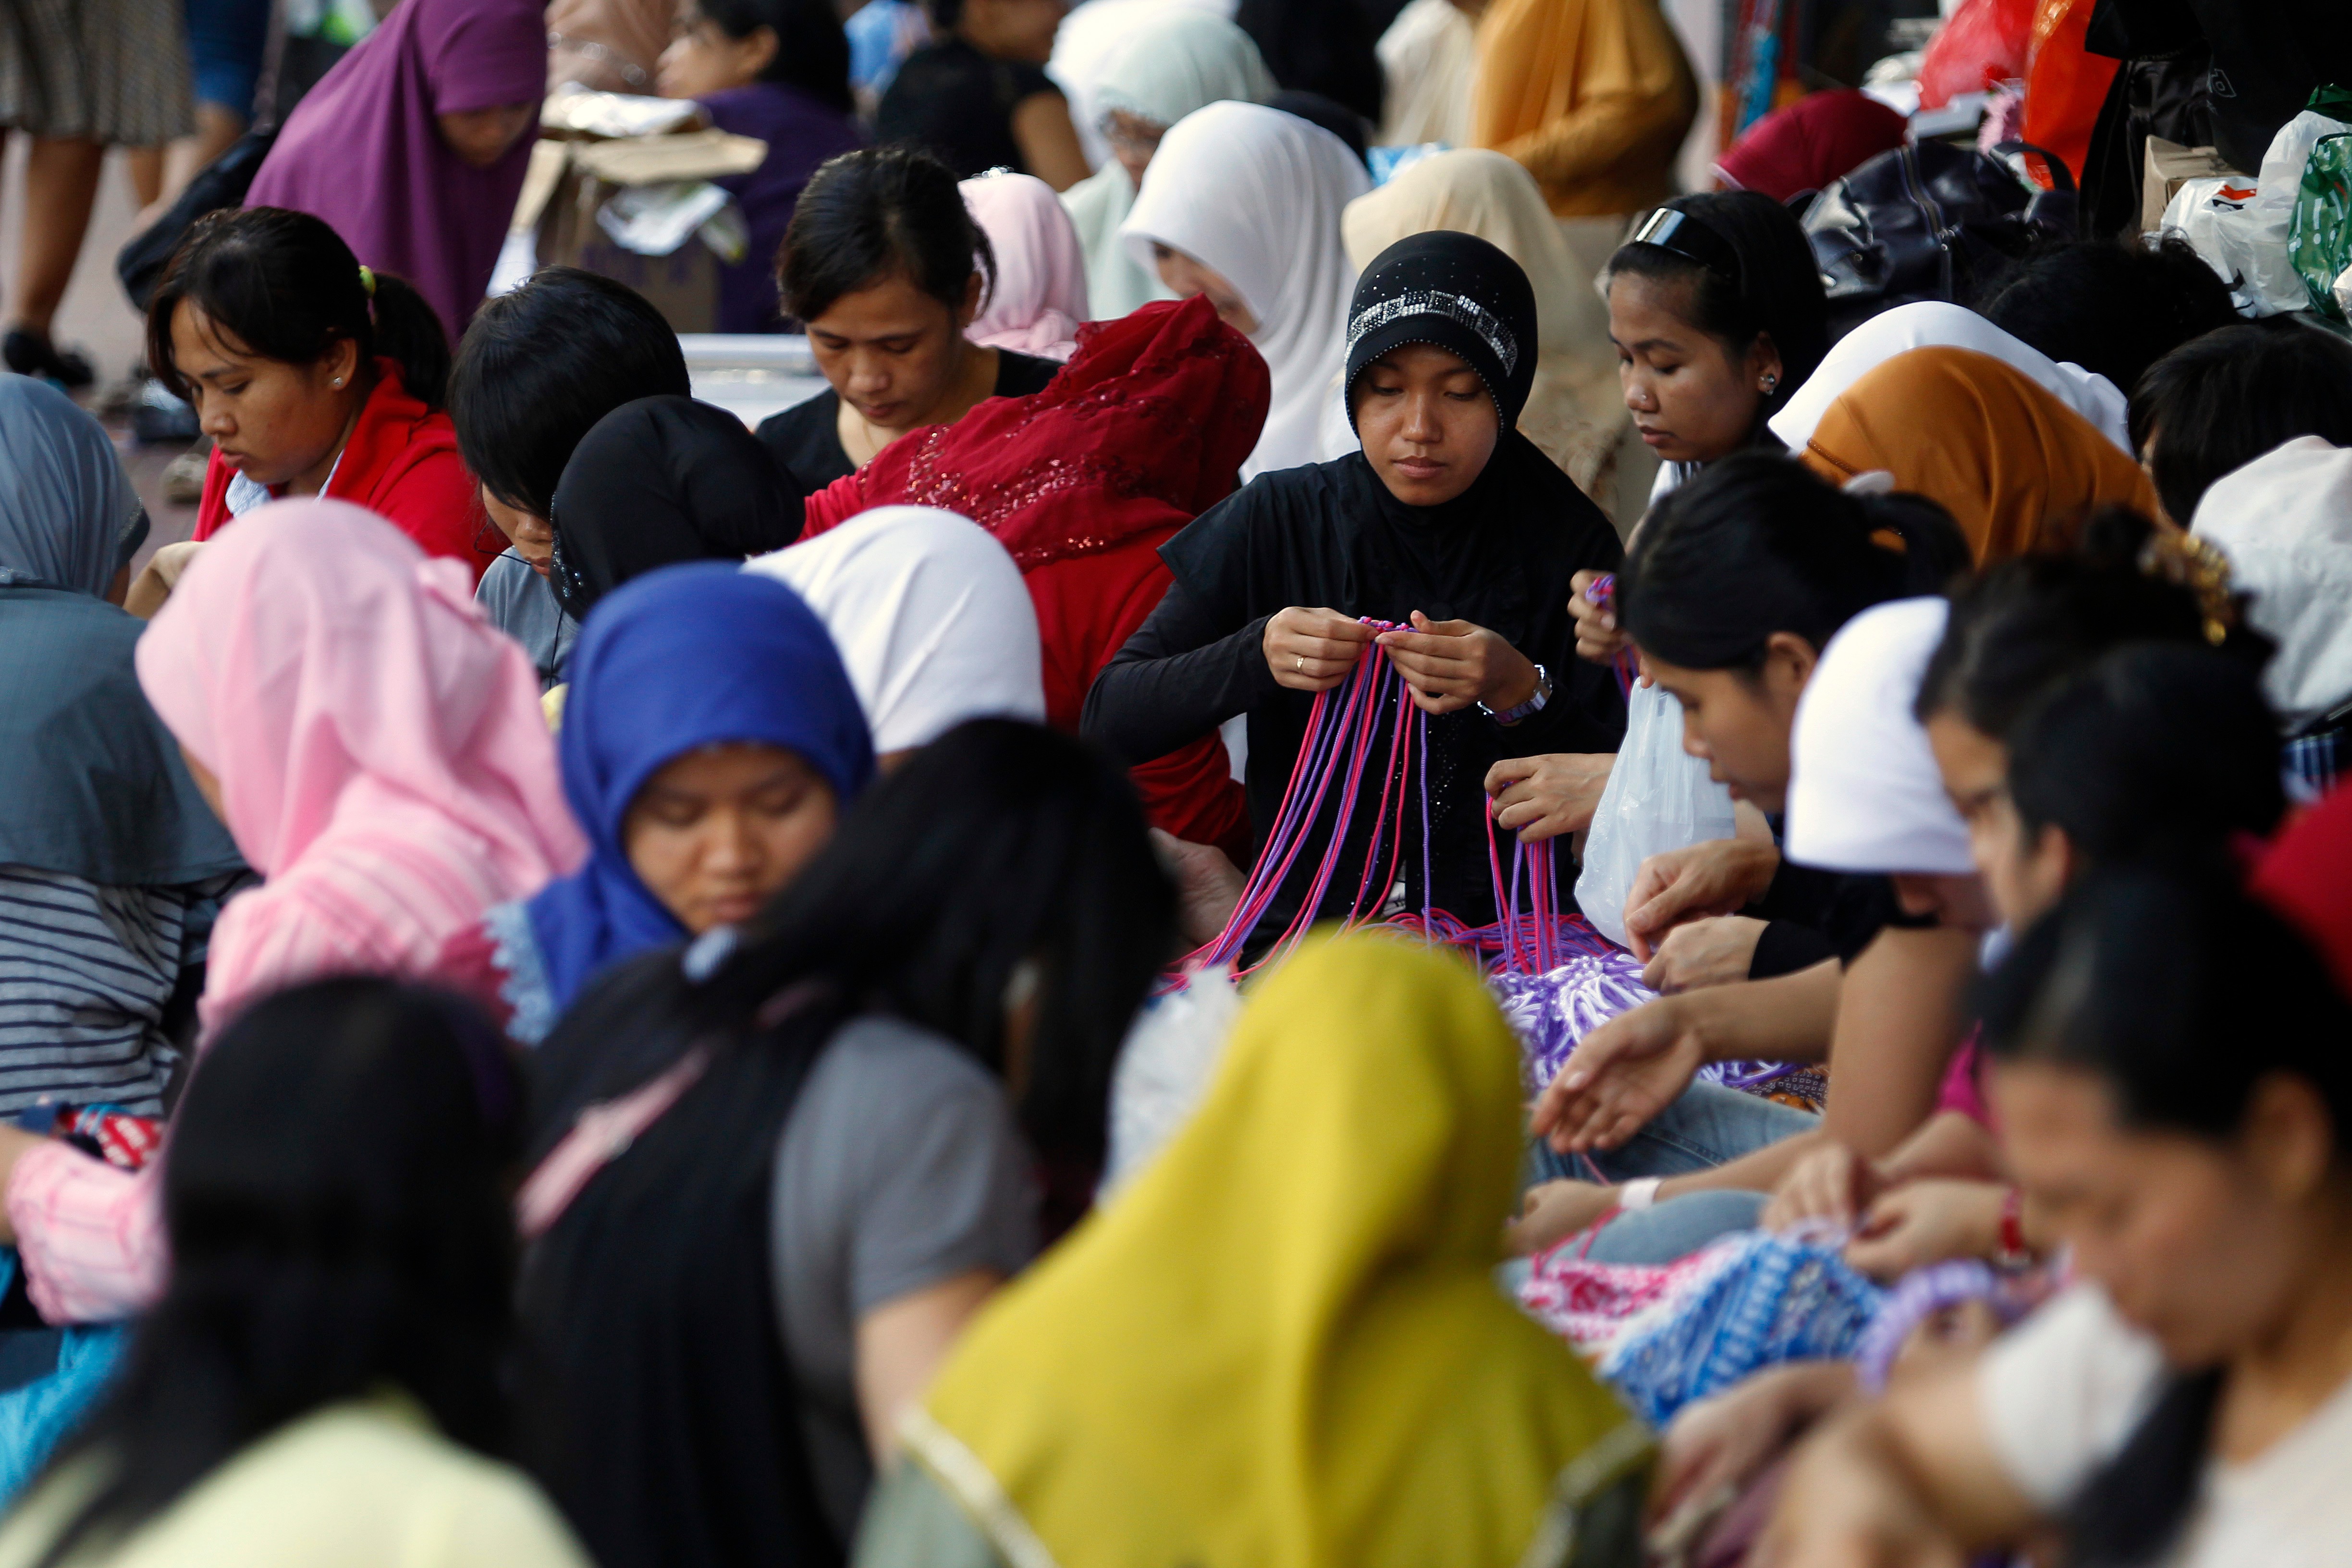 There are about 250,000 domestic workers in Malaysia, mostly from Indonesia and the Philippines. Hong Kong has about 370,000. Photo: AFP